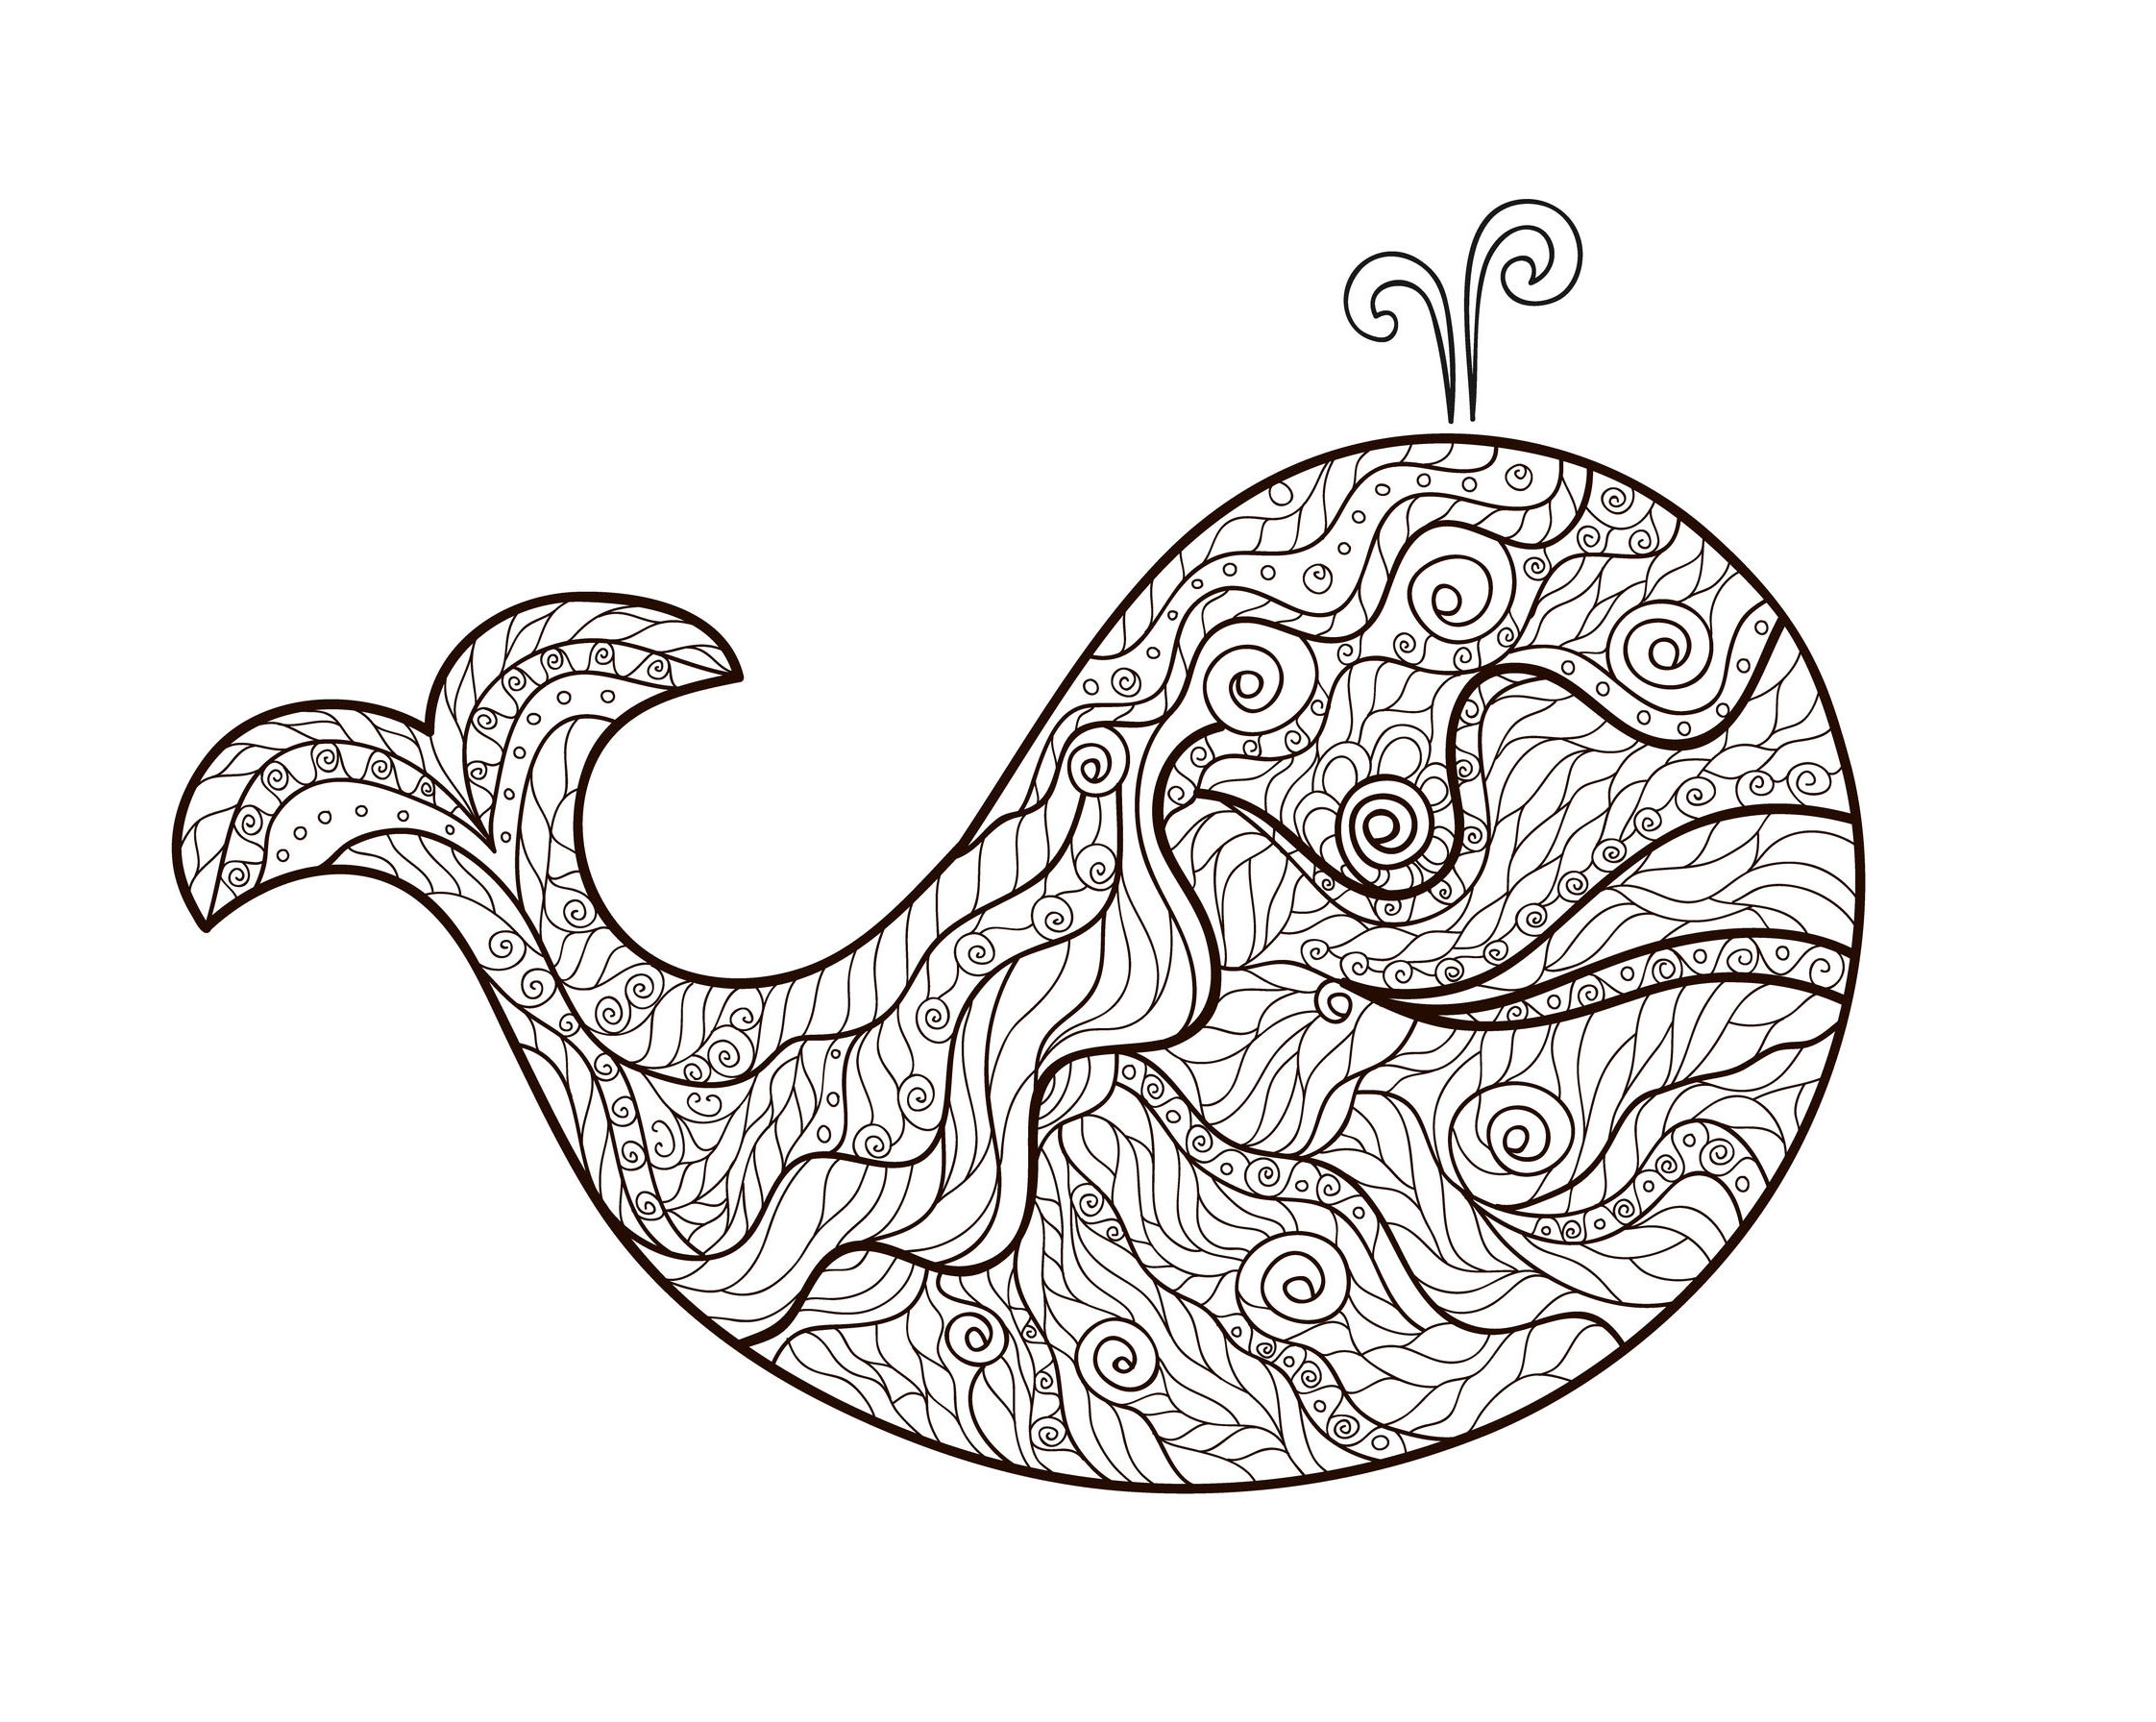 A whale and simple Zentangle patterns to color, by Meggichka (source: 123rf)